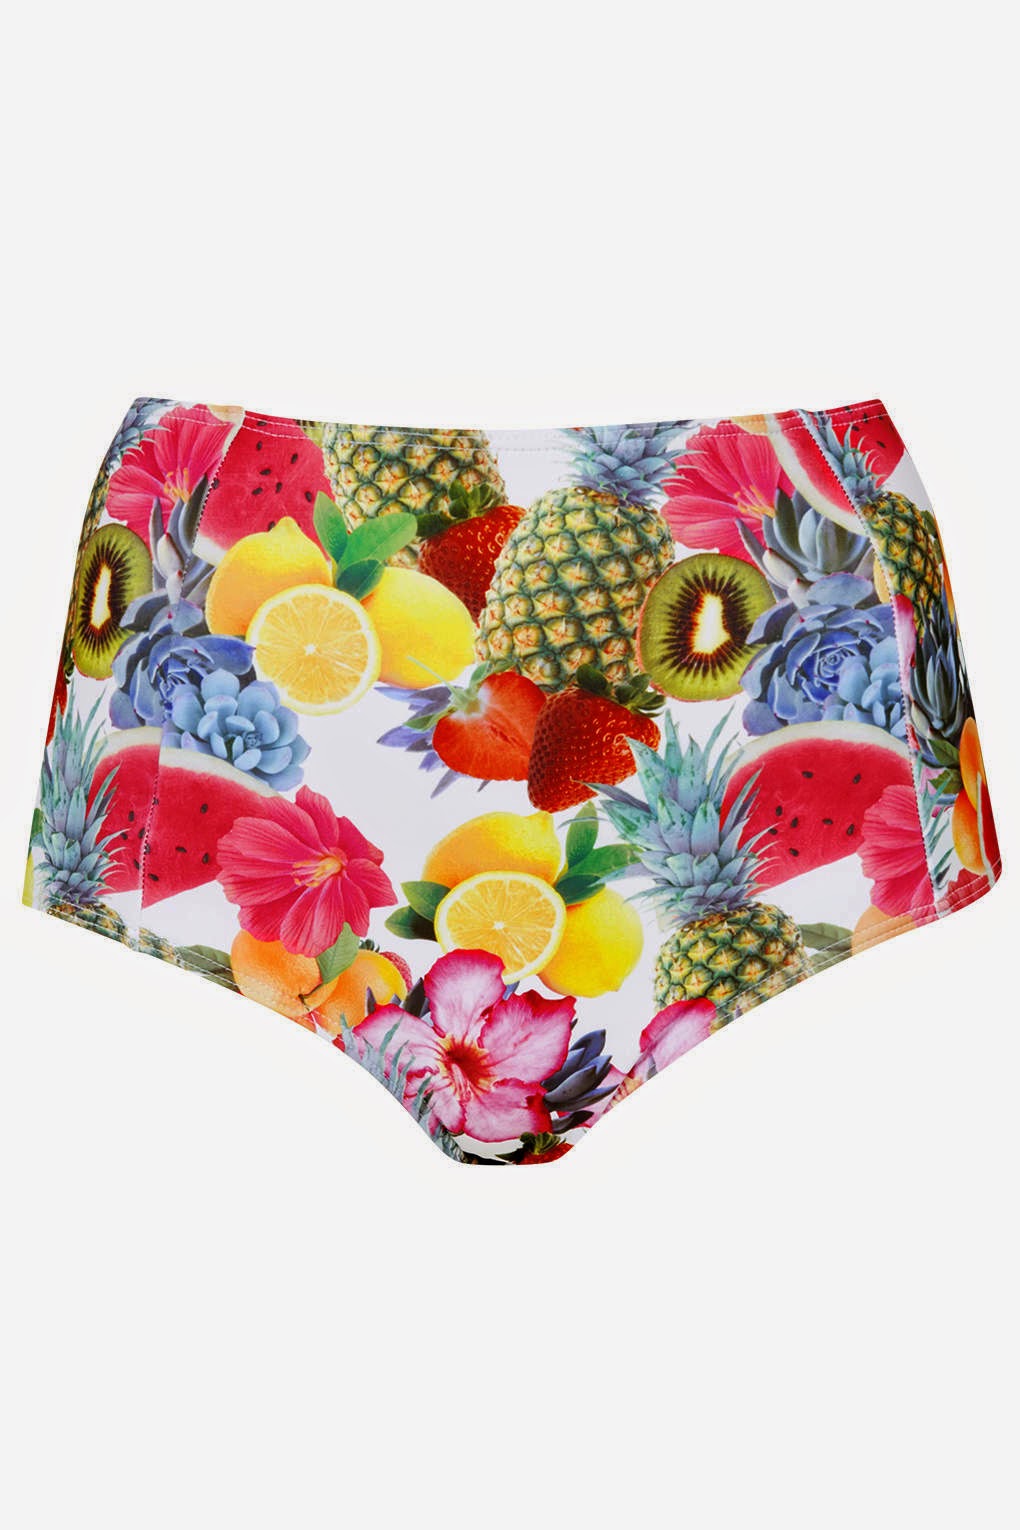 Fruit For The Office: Get Your Fashion 5 a Day with Fruity Prints